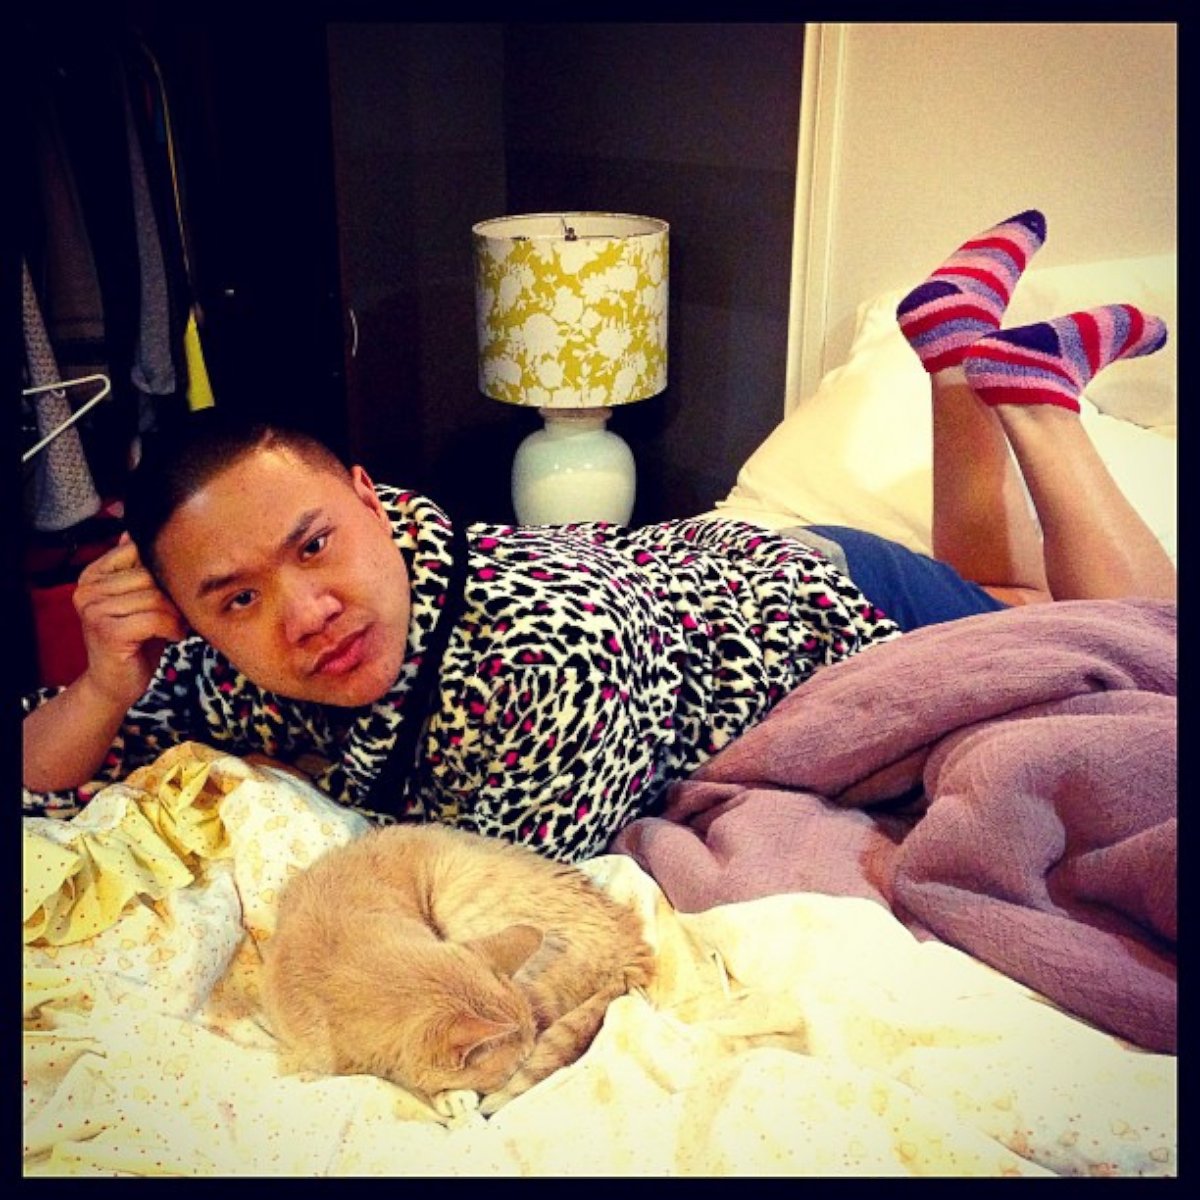 Tim Delaghetto posted this photo to Instagram on Jan. 14, 2013 with the caption, "It's real out here in these streets. Tryna keep warm. #MyBodyIsReady